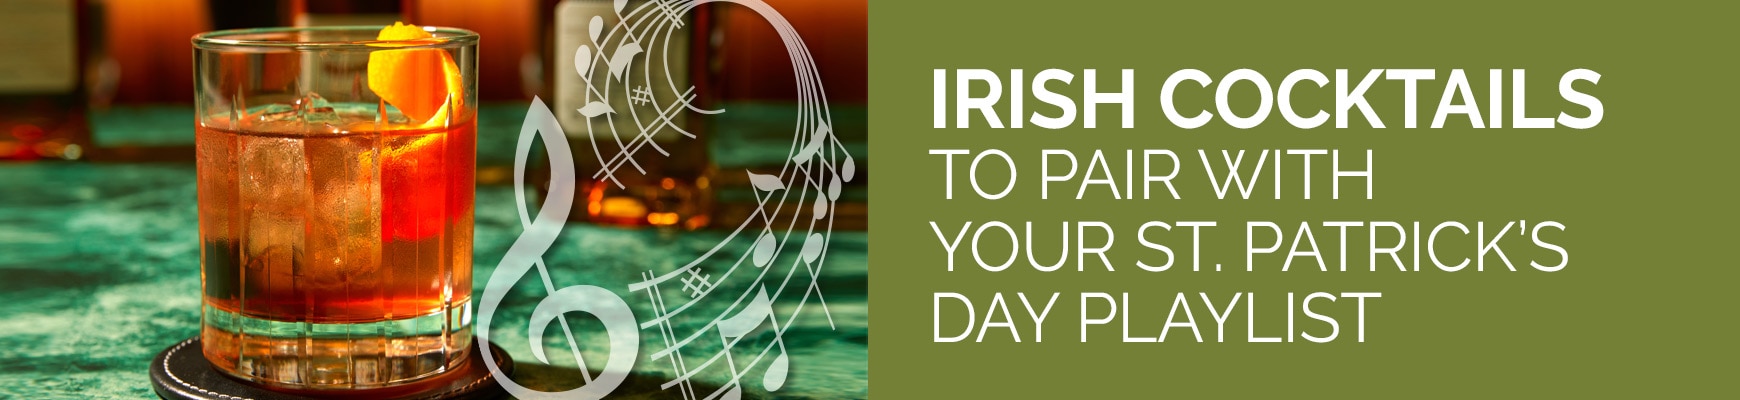 Irish Cocktails to Pair with Your St. Patrick's Day Playlist